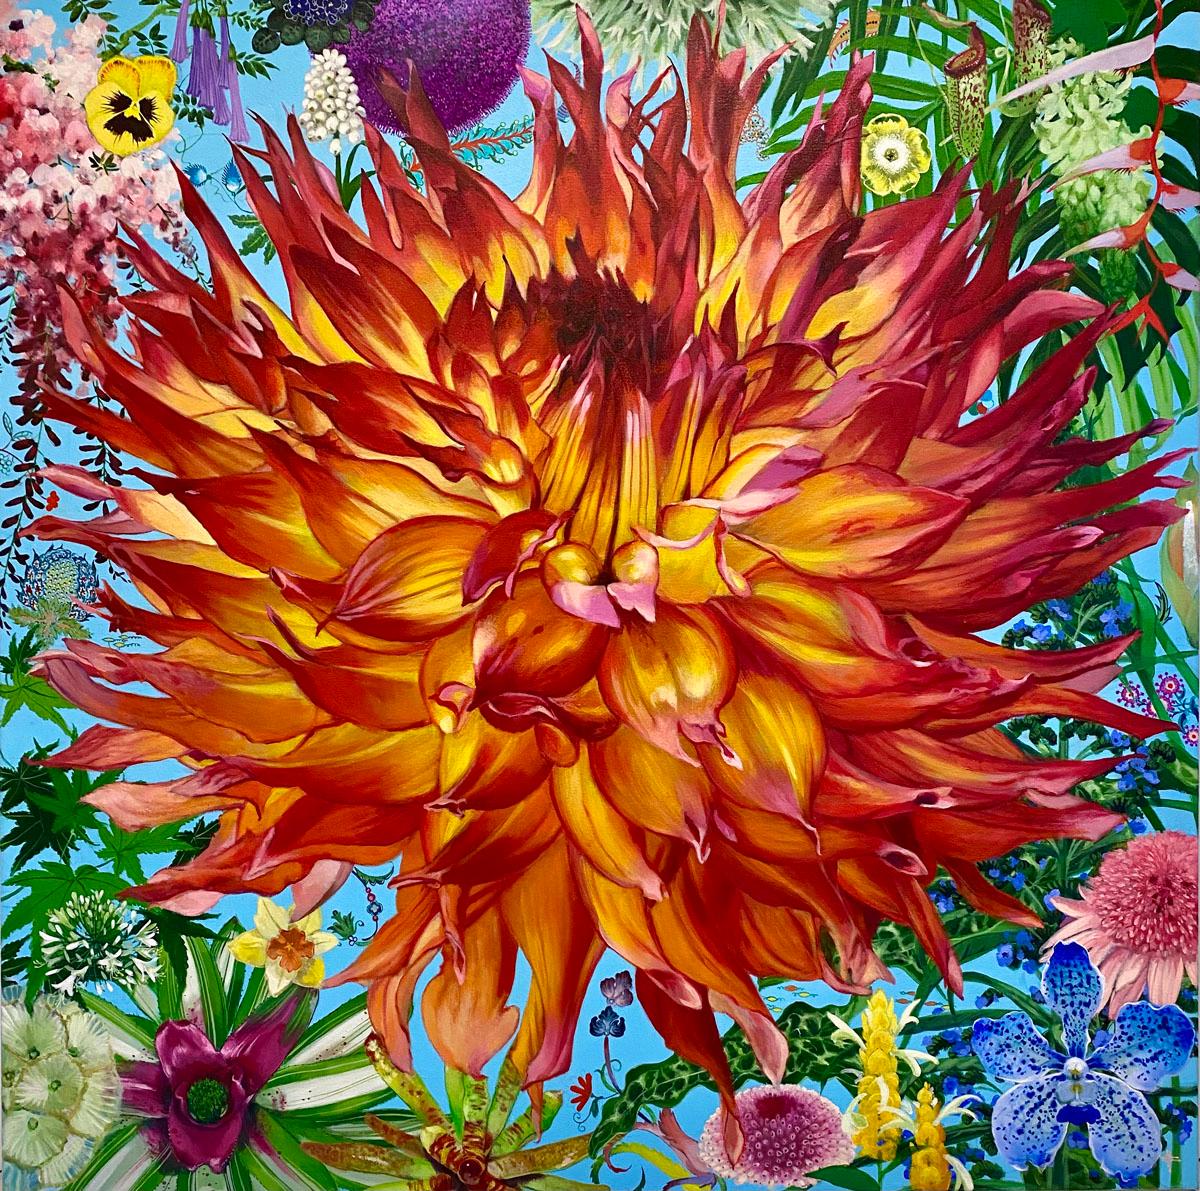 Terre - contemporary colorful floral tropical jungle flower acrylic painting - Painting by Keng Wai Lee